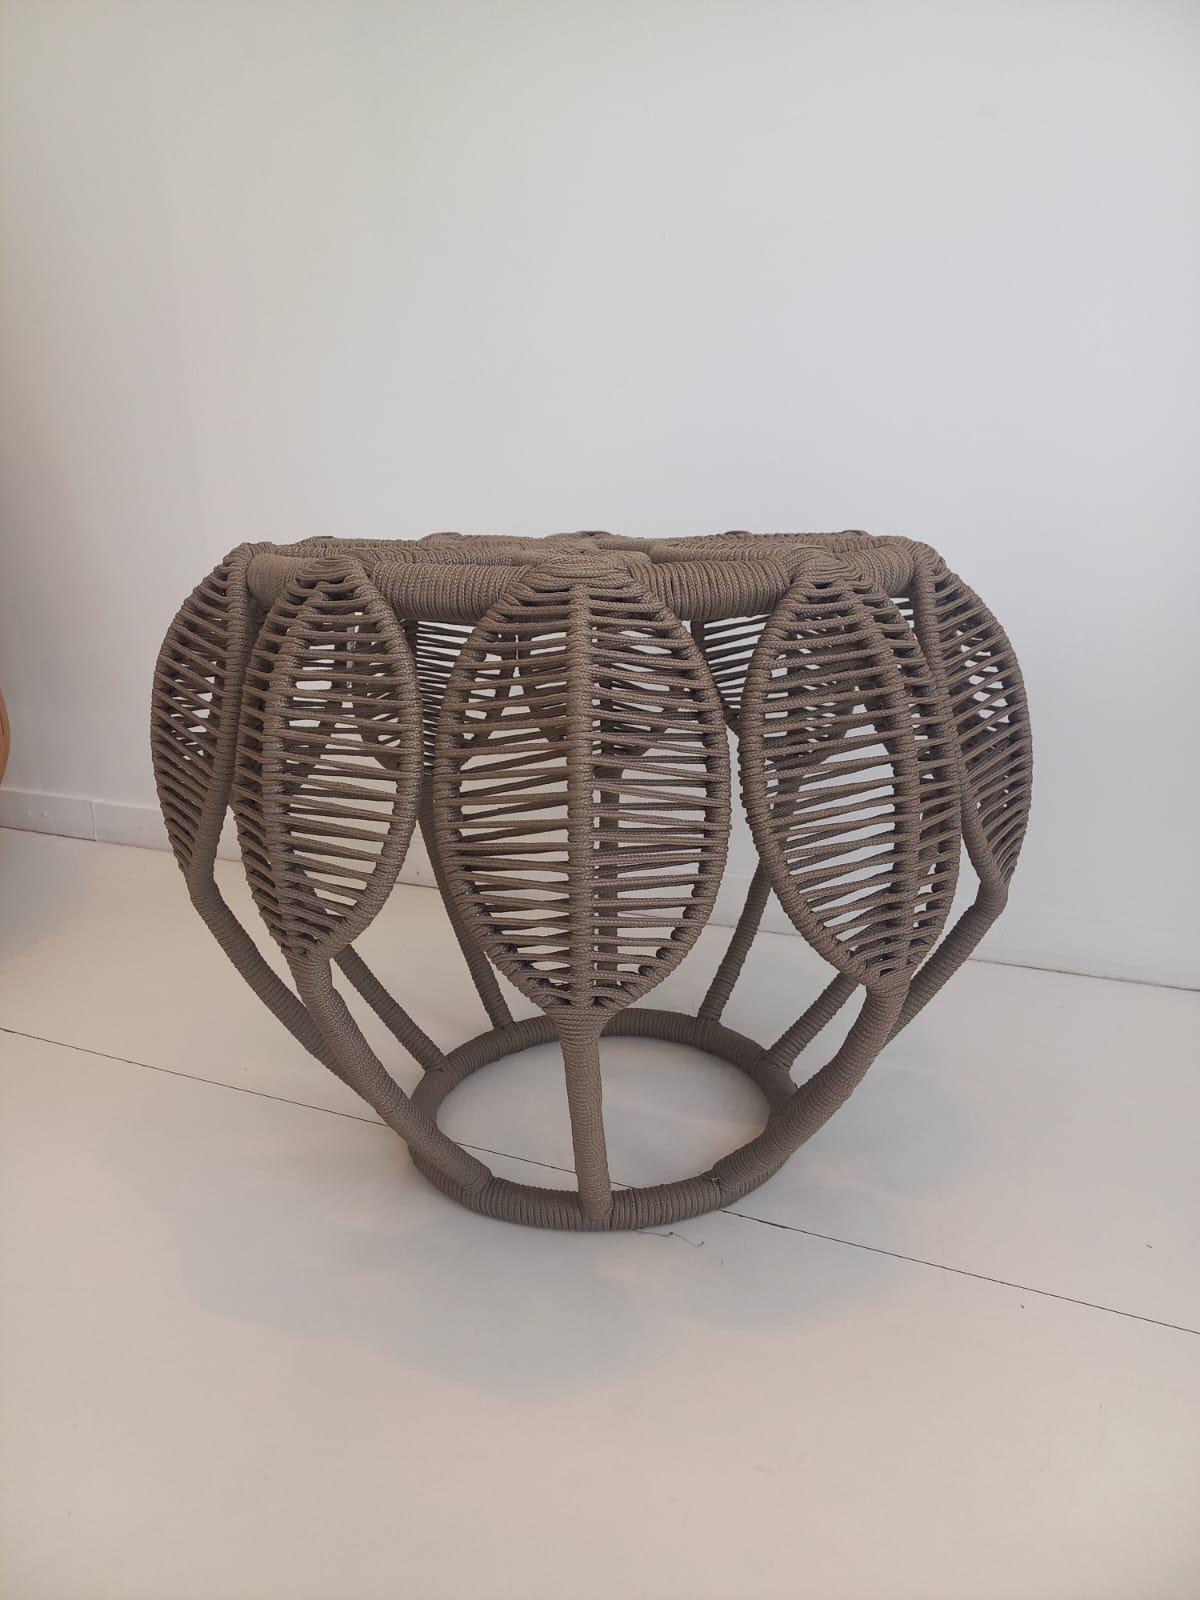 Sergio J. Matos, the designer from the North Eastern State of  Mato Grosso, took his inspiration for the Ipê stool from one of the  icons of the Brazilian ﬂora: the Ipê tree. The stool's steel structure  branches out into stylized leaves that cover